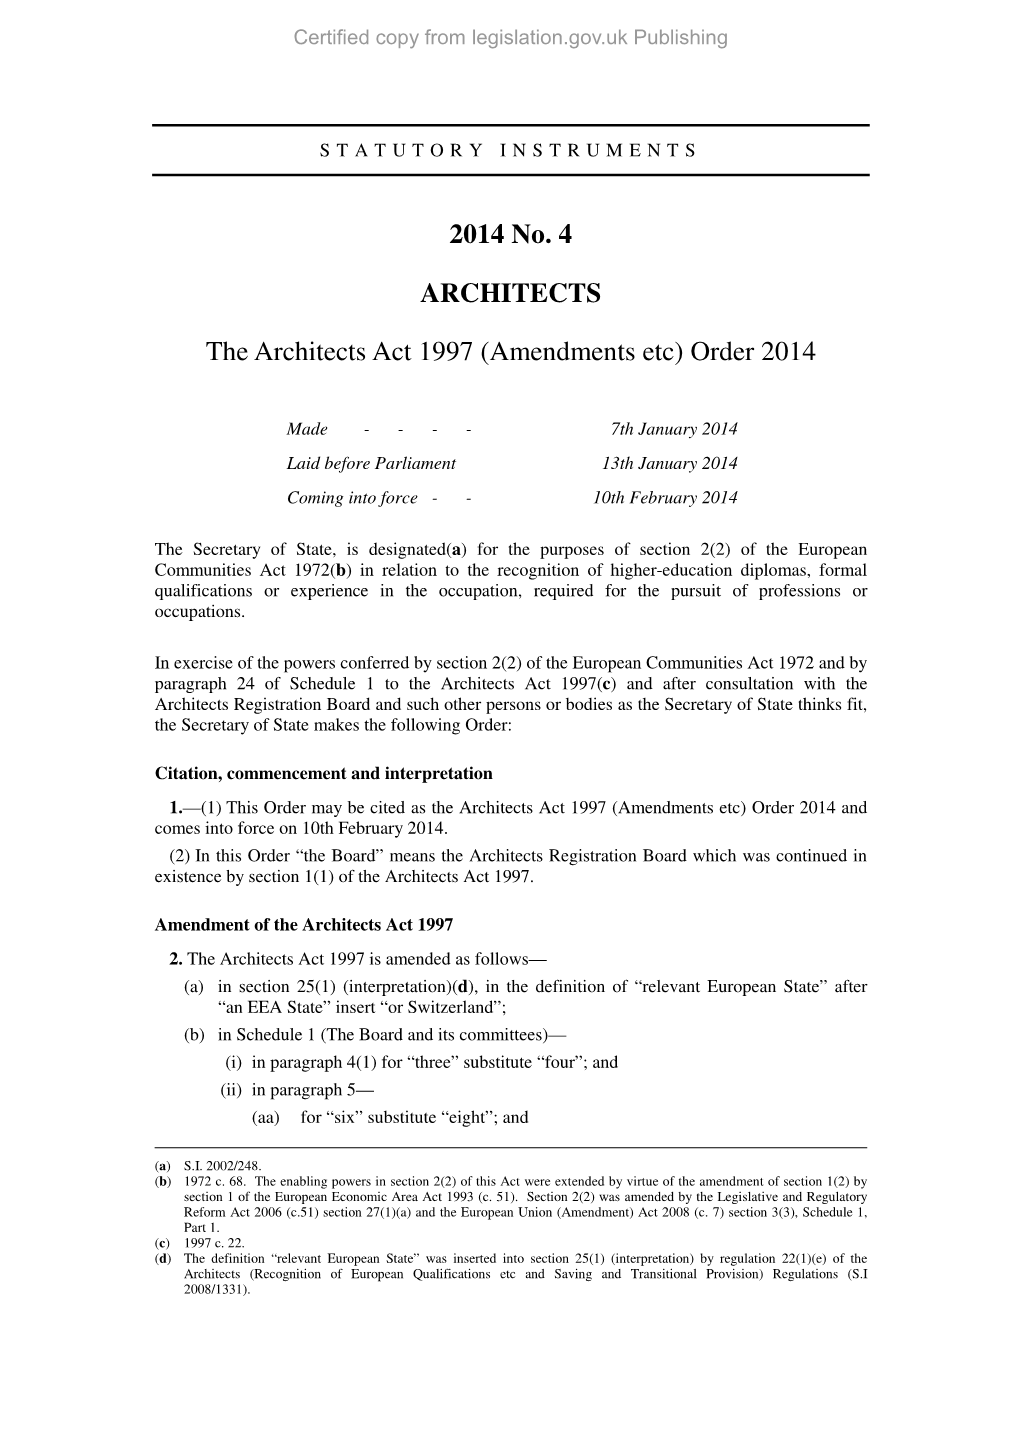 2014 No. 4 ARCHITECTS the Architects Act 1997 (Amendments Etc) Order 2014